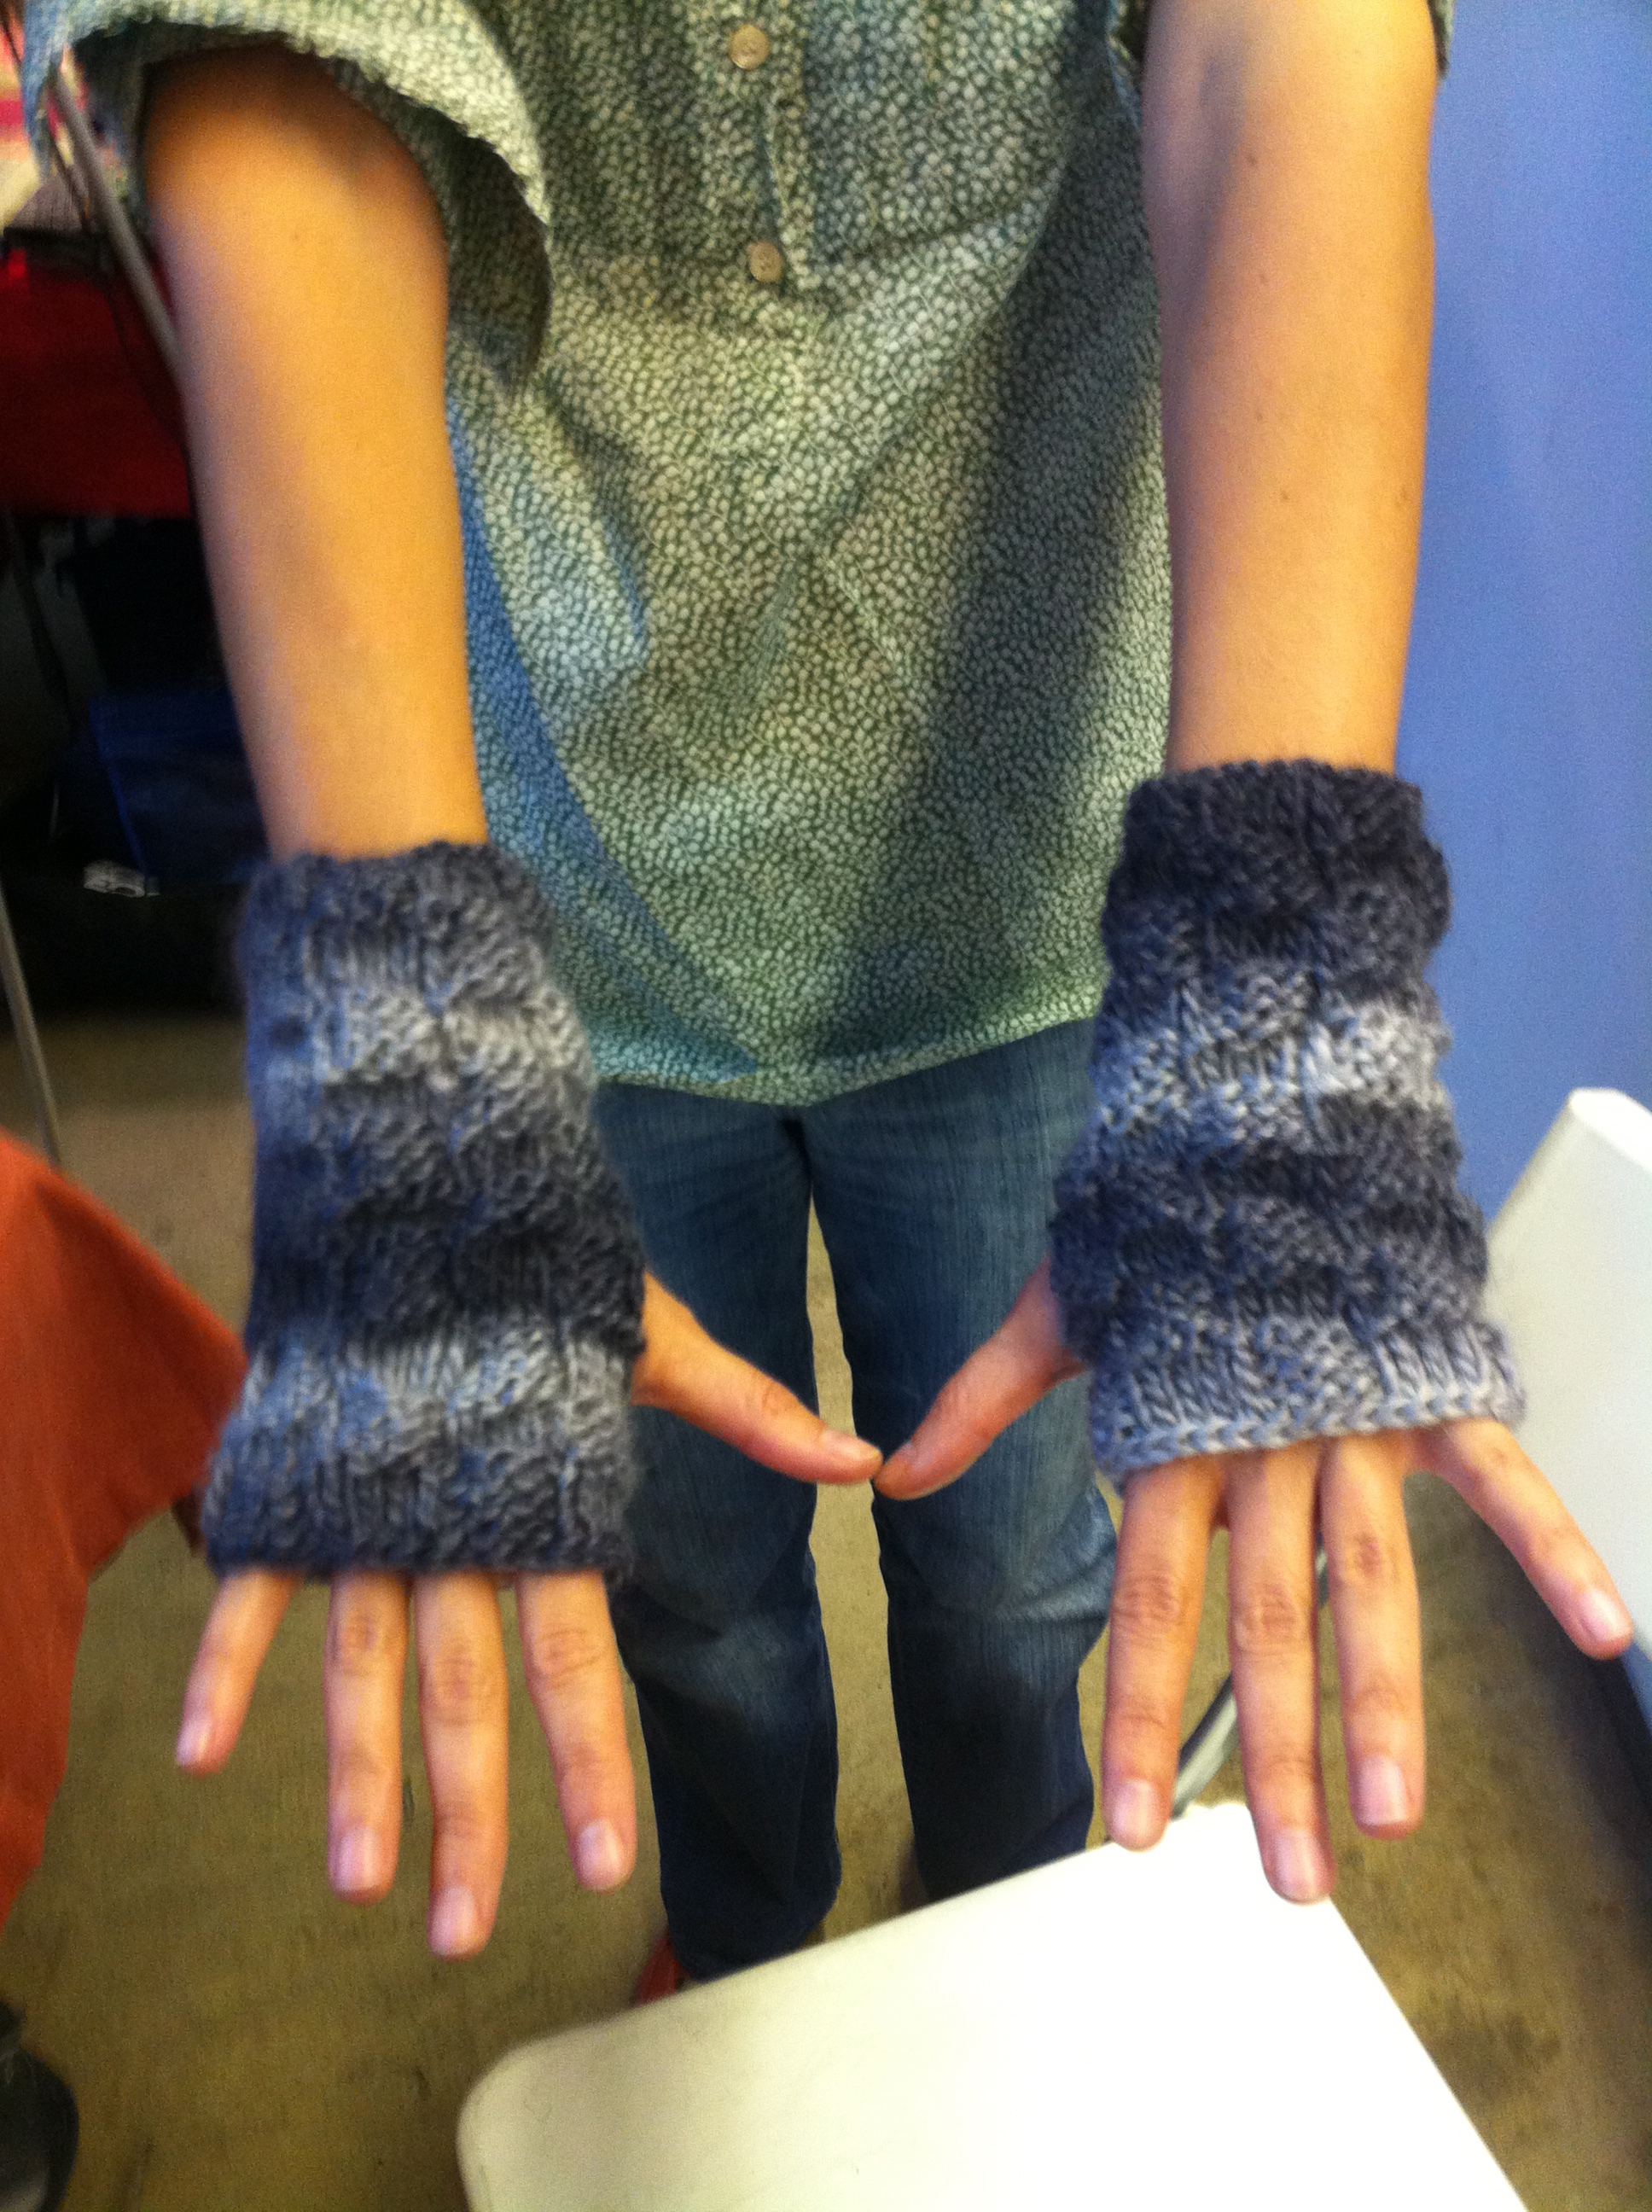  Among her many talents, Farrah is an expert knitter and on autumn Flea weekends we offered her hand-knit fingerless gloves (often knit on the spot that very day!) as "poetry mitts," perfect for thumbing pages and keeping your hands warm. 